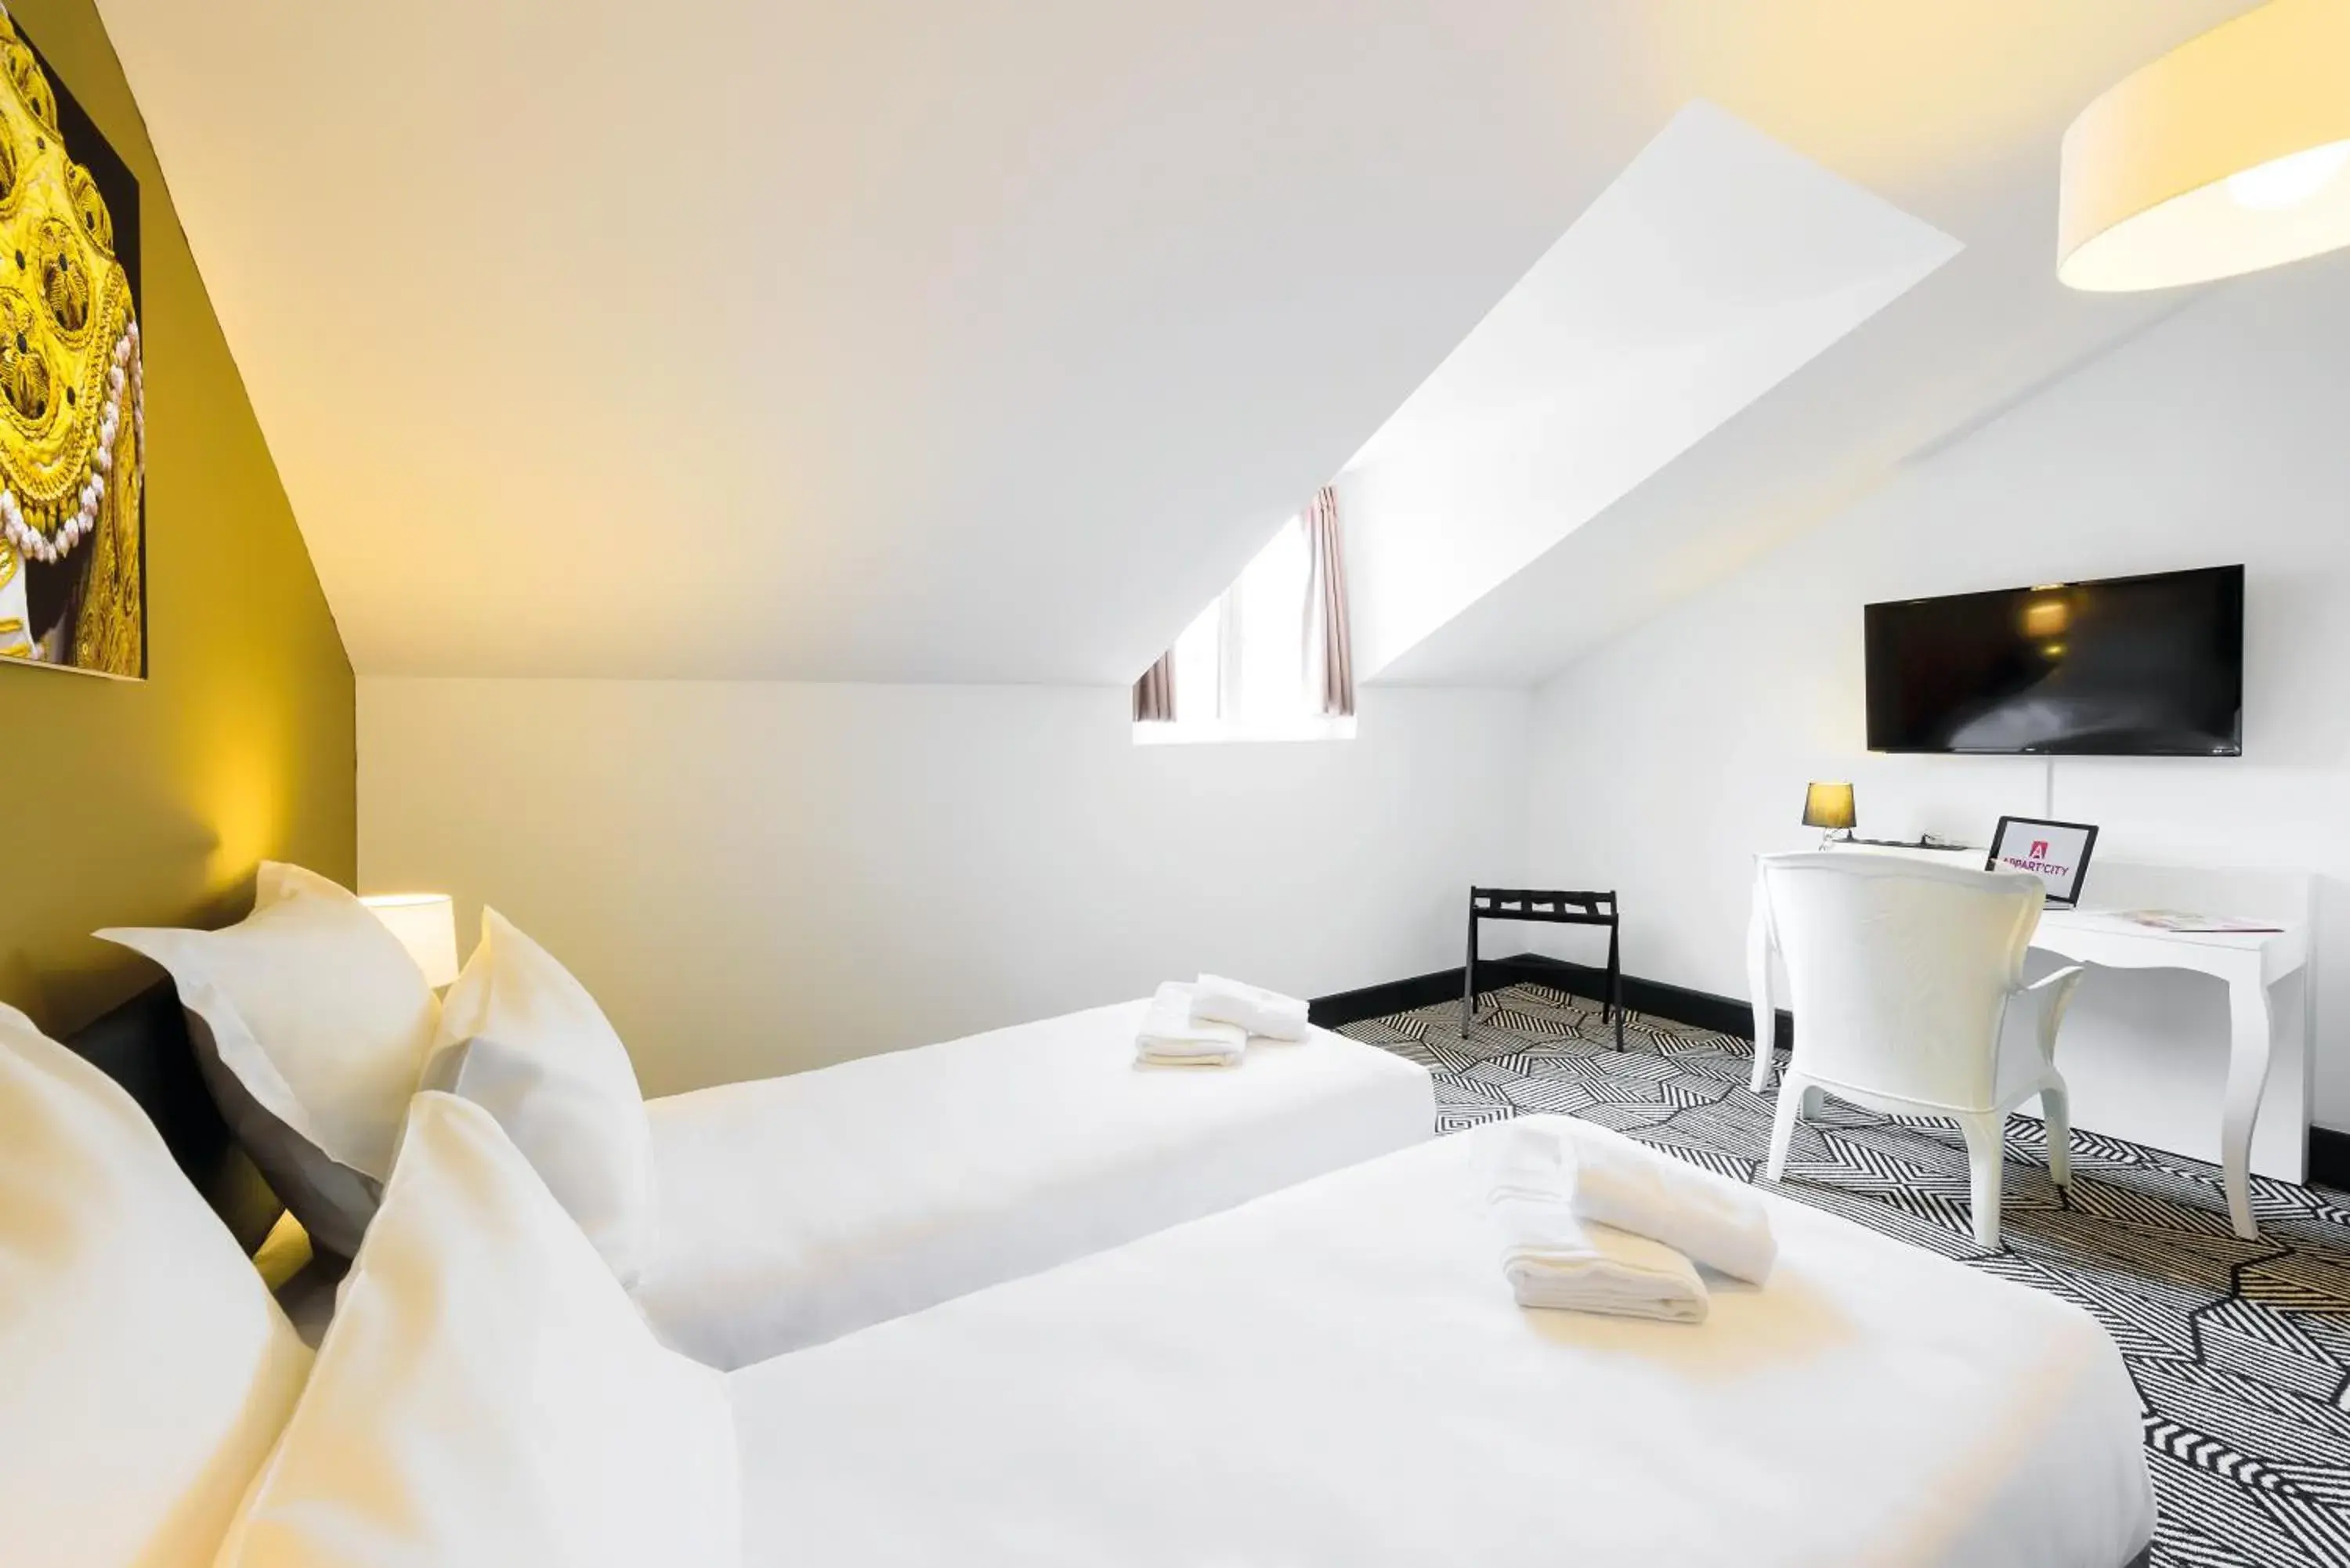 Bed, Room Photo in Appart City Nimes Arenes